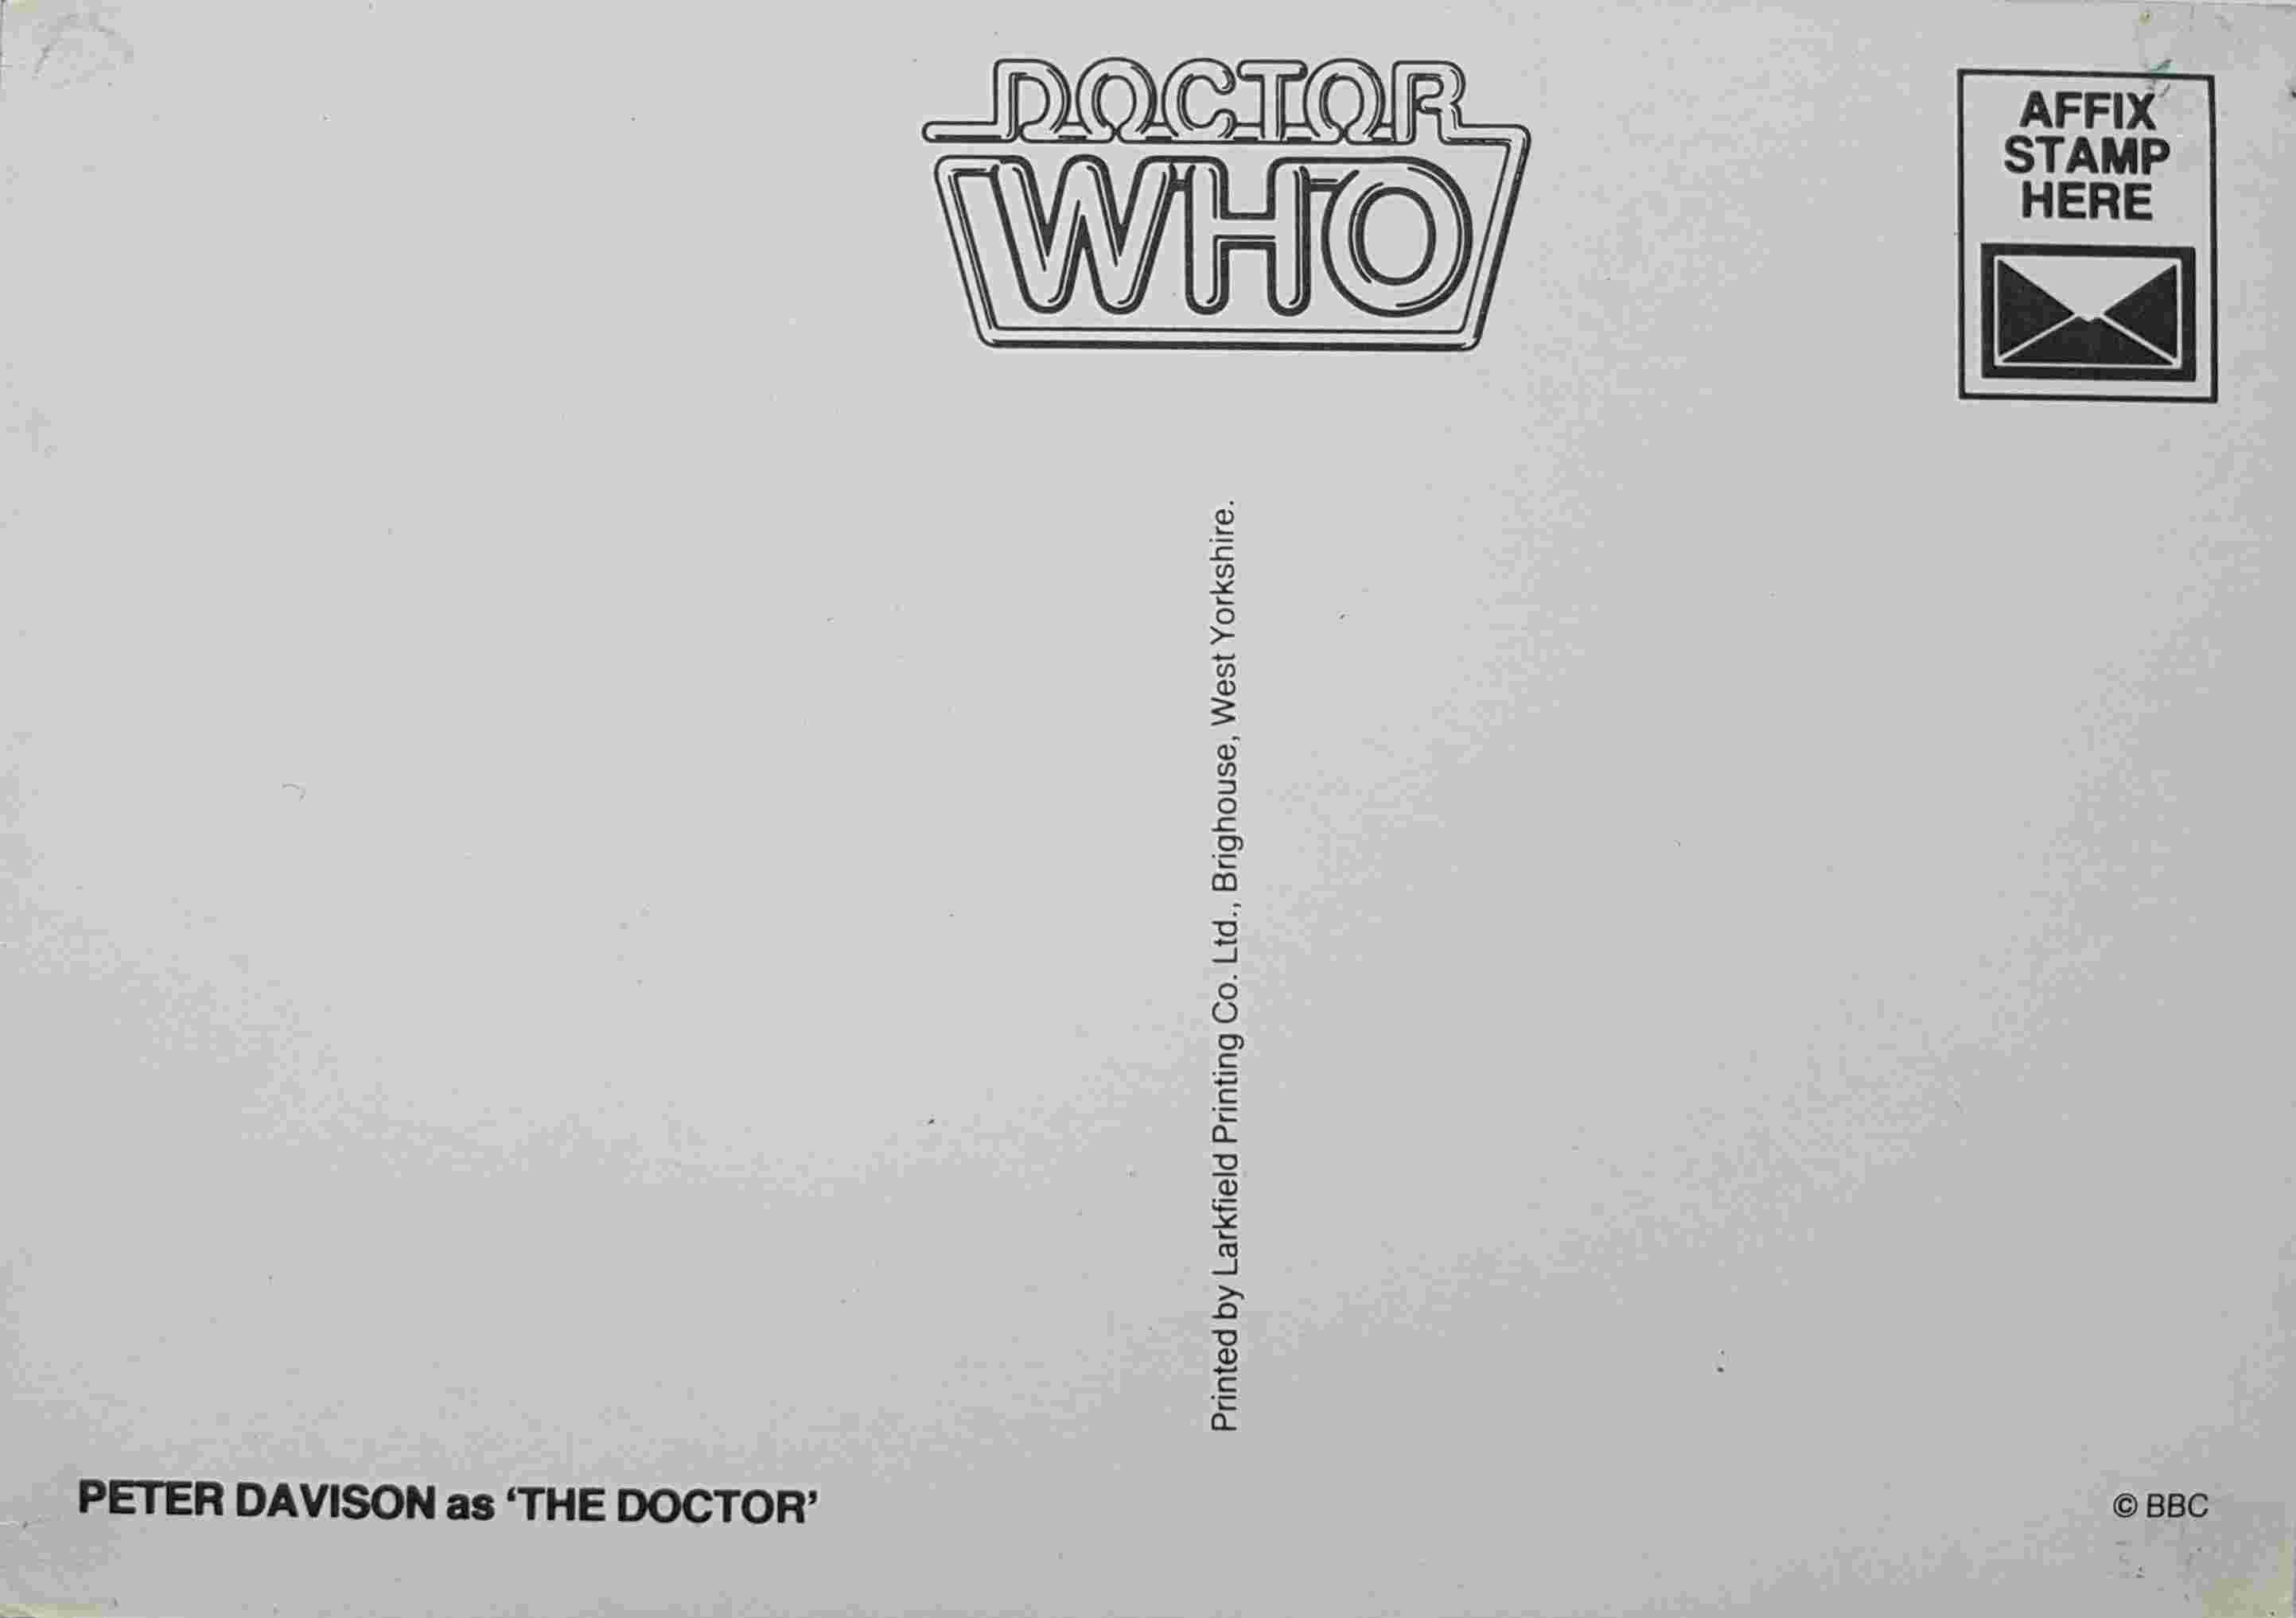 Picture of PC-DW-PD Doctor Who - Peter Davison by artist Unknown from the BBC records and Tapes library